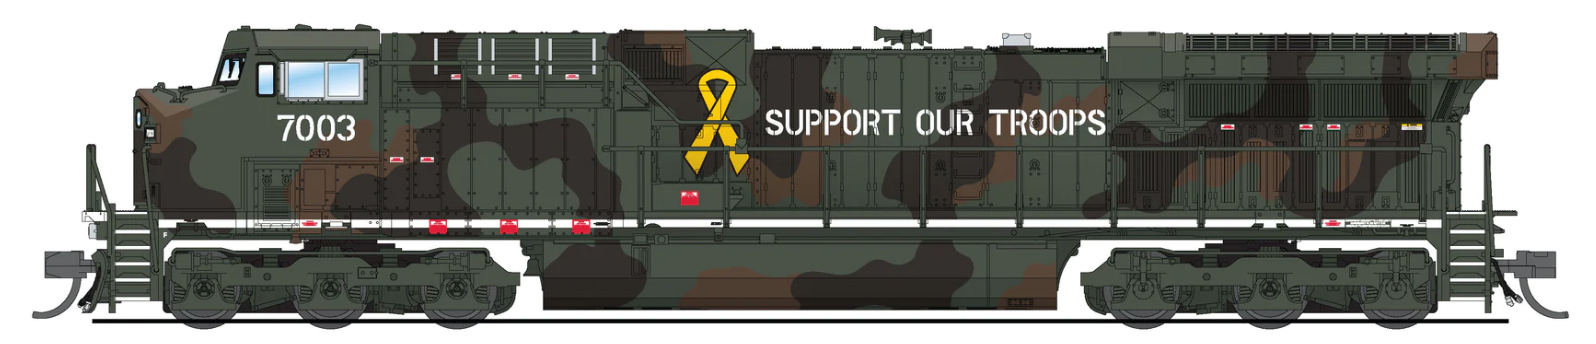 CN "Support Our Troops" [Fantasy]